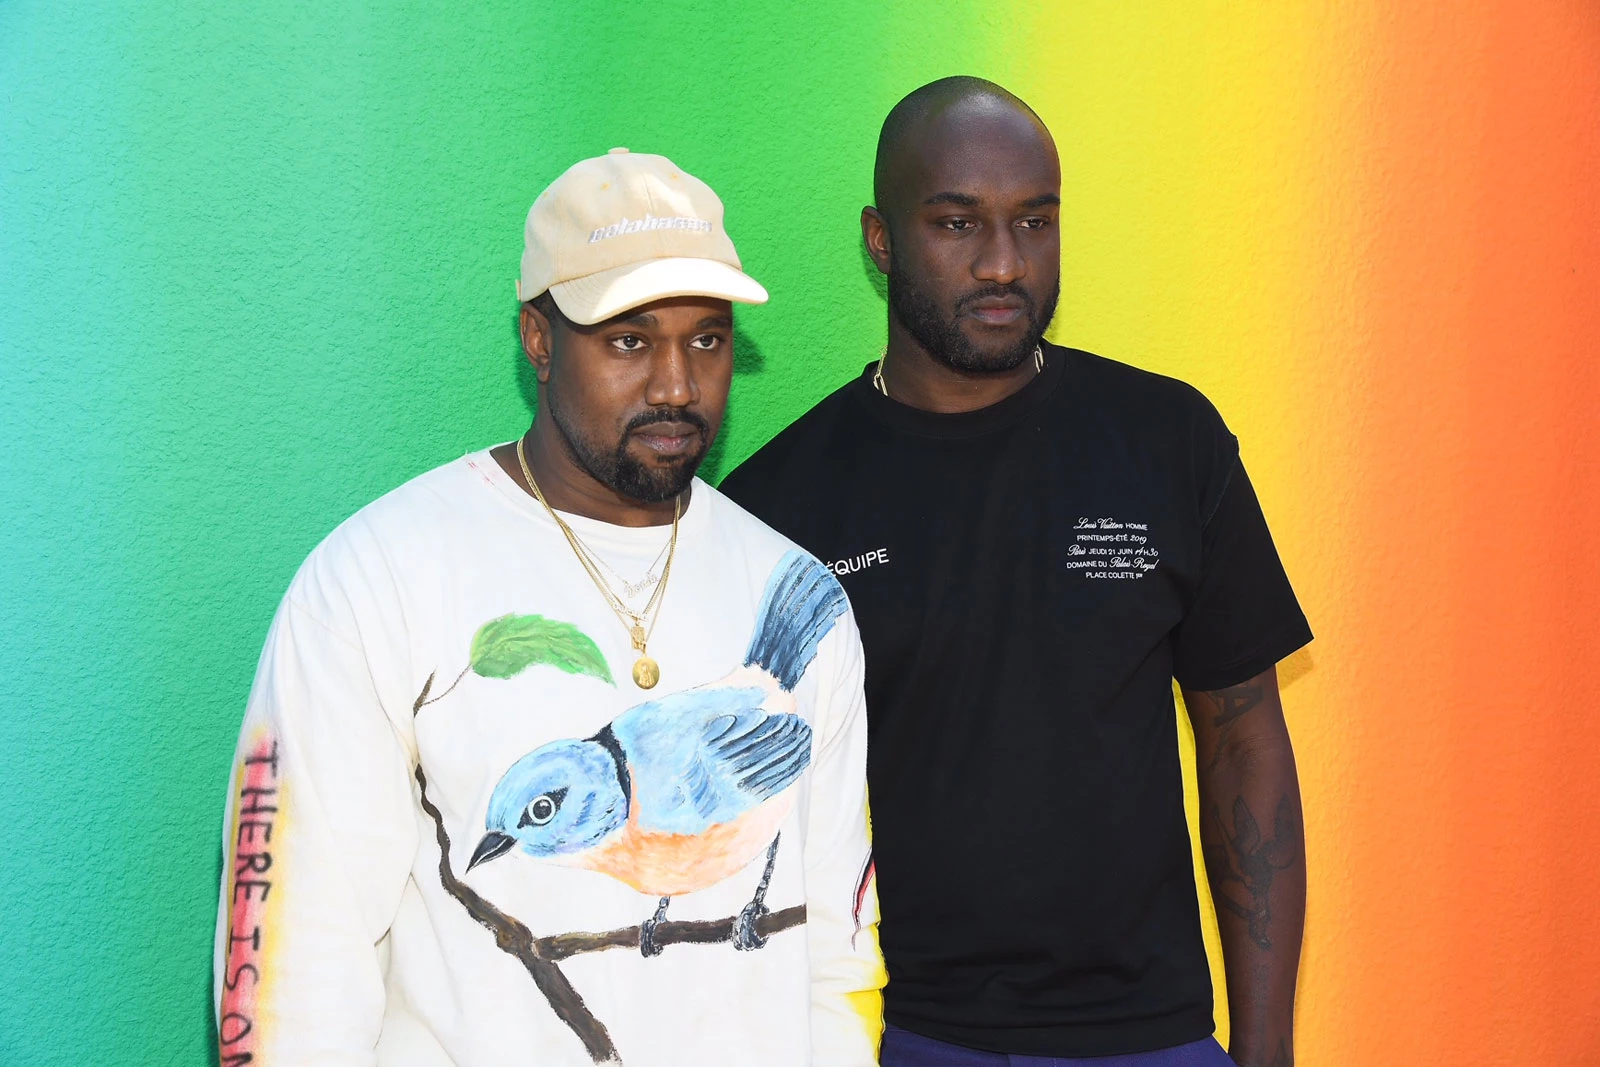 Kanye West and Virgil Abloh Brought to Tears During Reunion - XXL